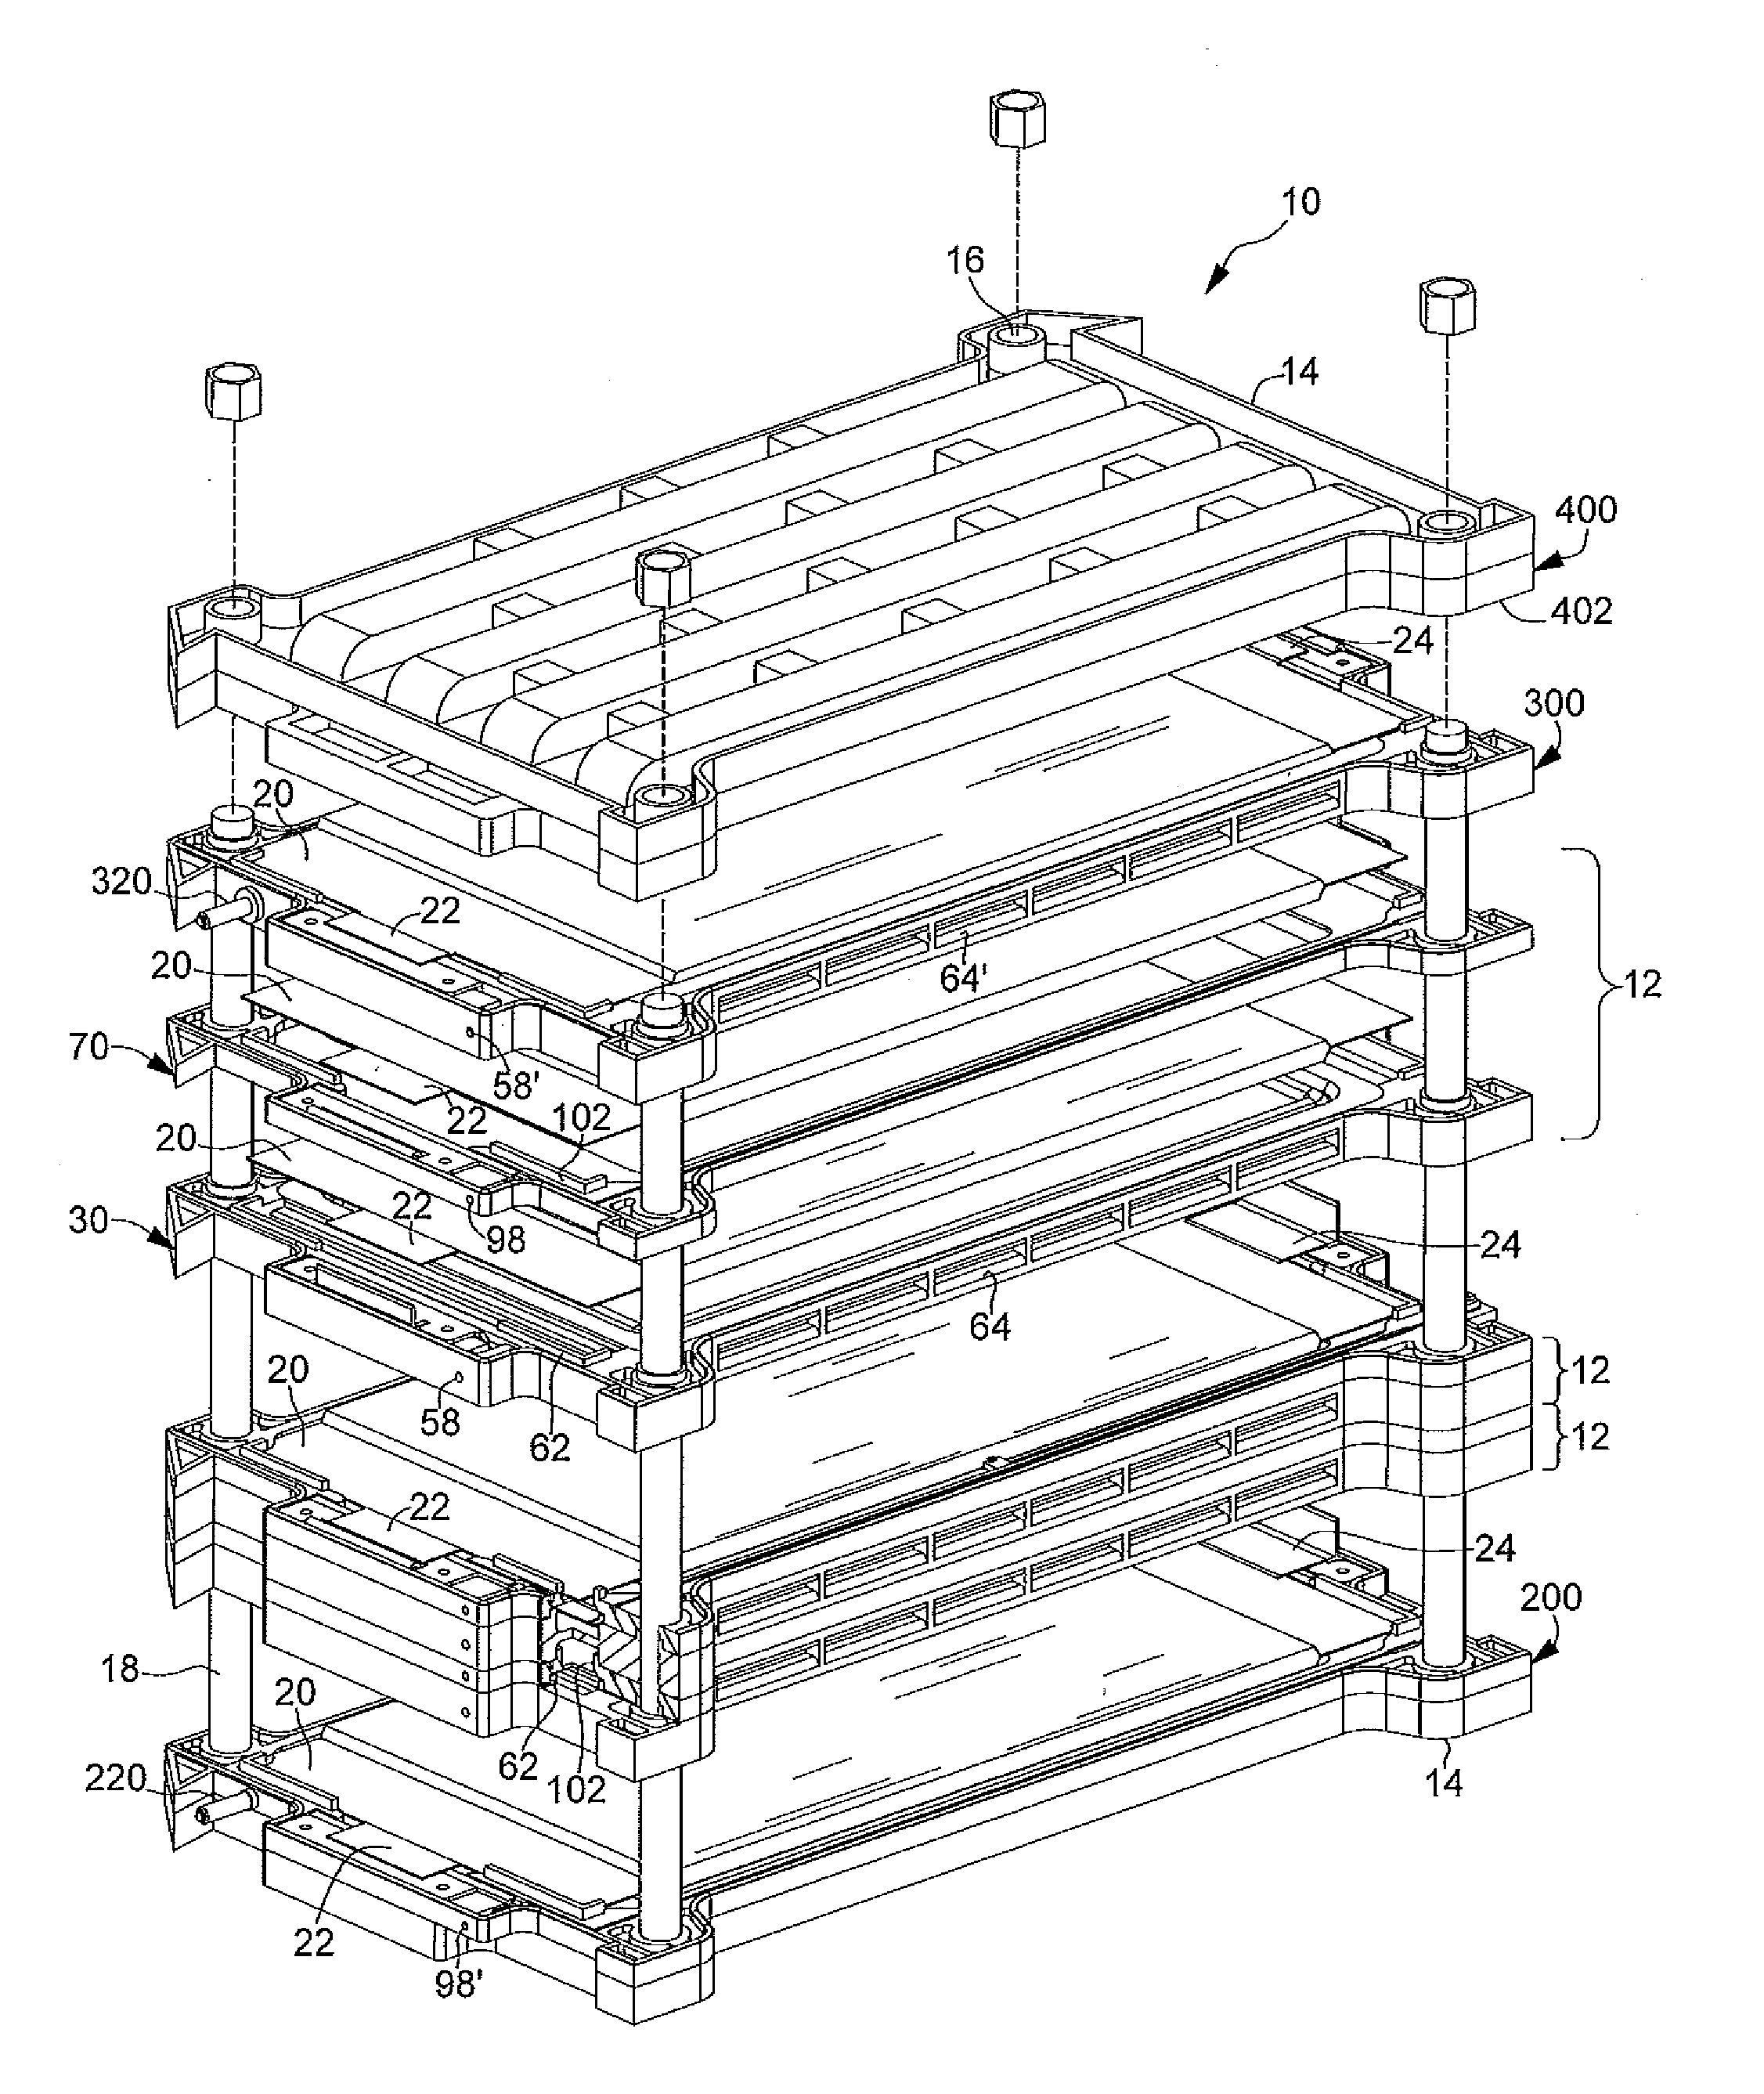 Repeating frame battery with joining of cell tabs via welded-on male and female slip-fit connectors